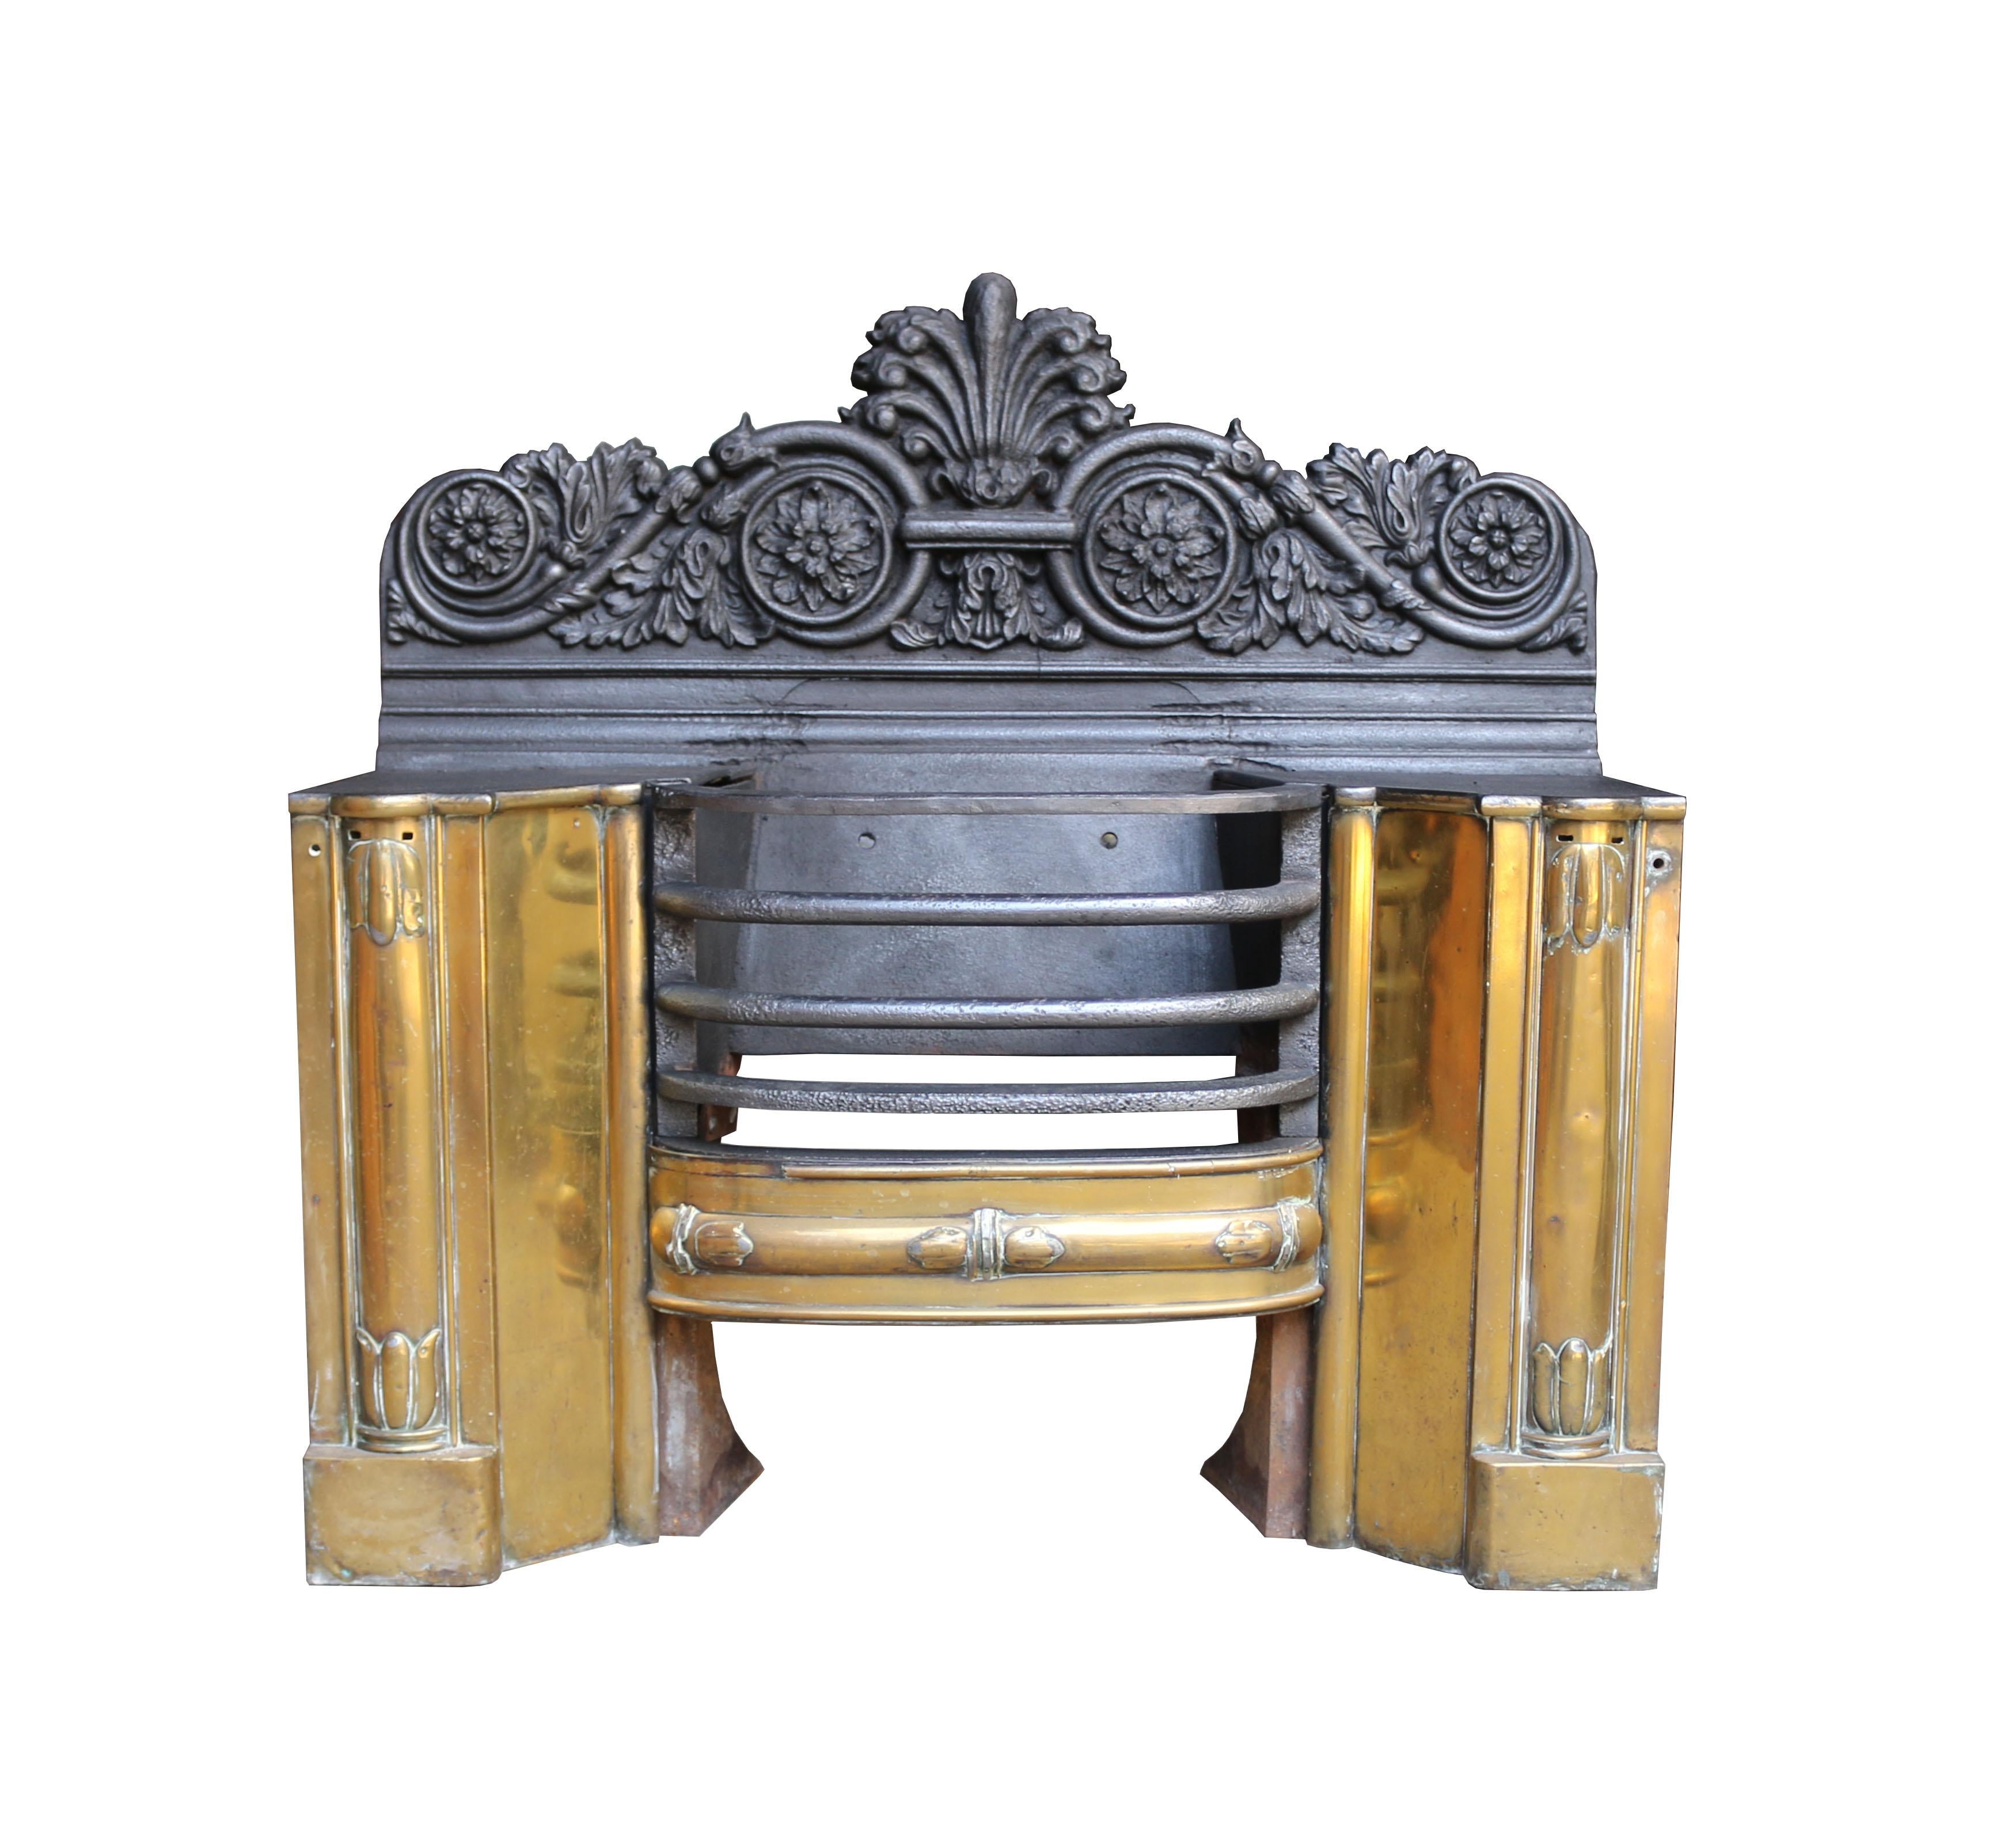 An unusual cast iron hob grate, the front faces covered with polished brass.